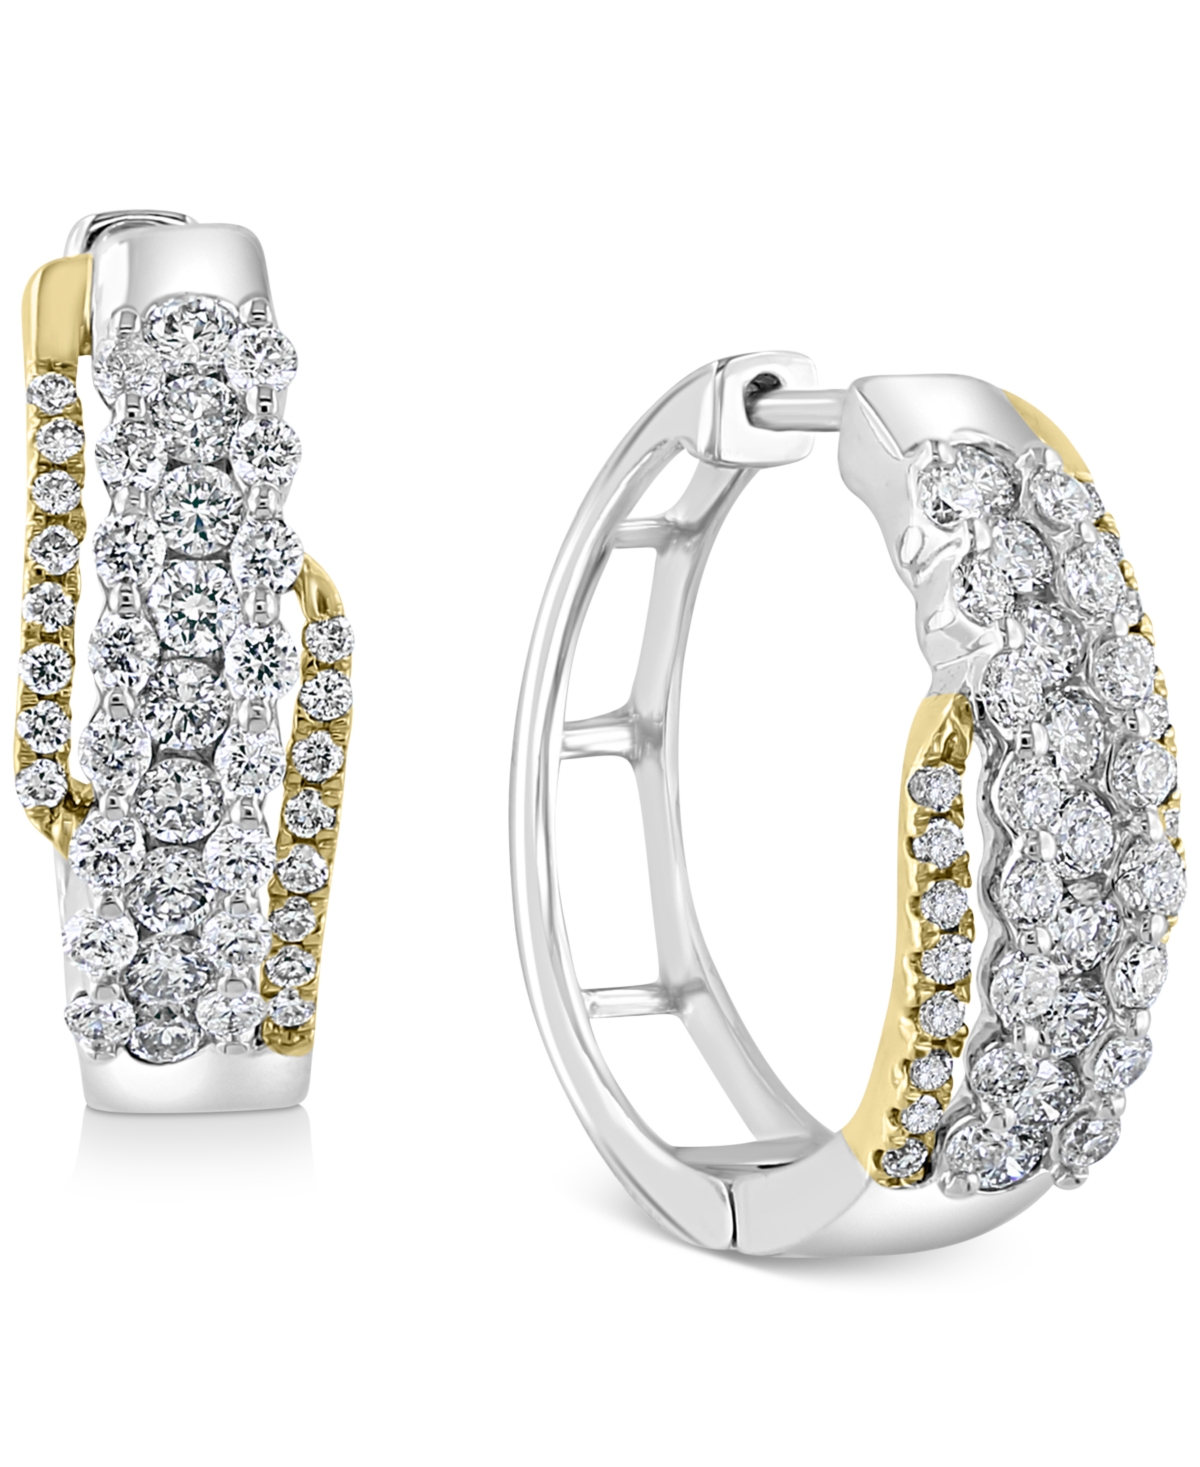 Effy Collection Effy Diamond Two-Tone Hoop Earrings (5/8 ct. t.w.) in 14k Gold & White Gold